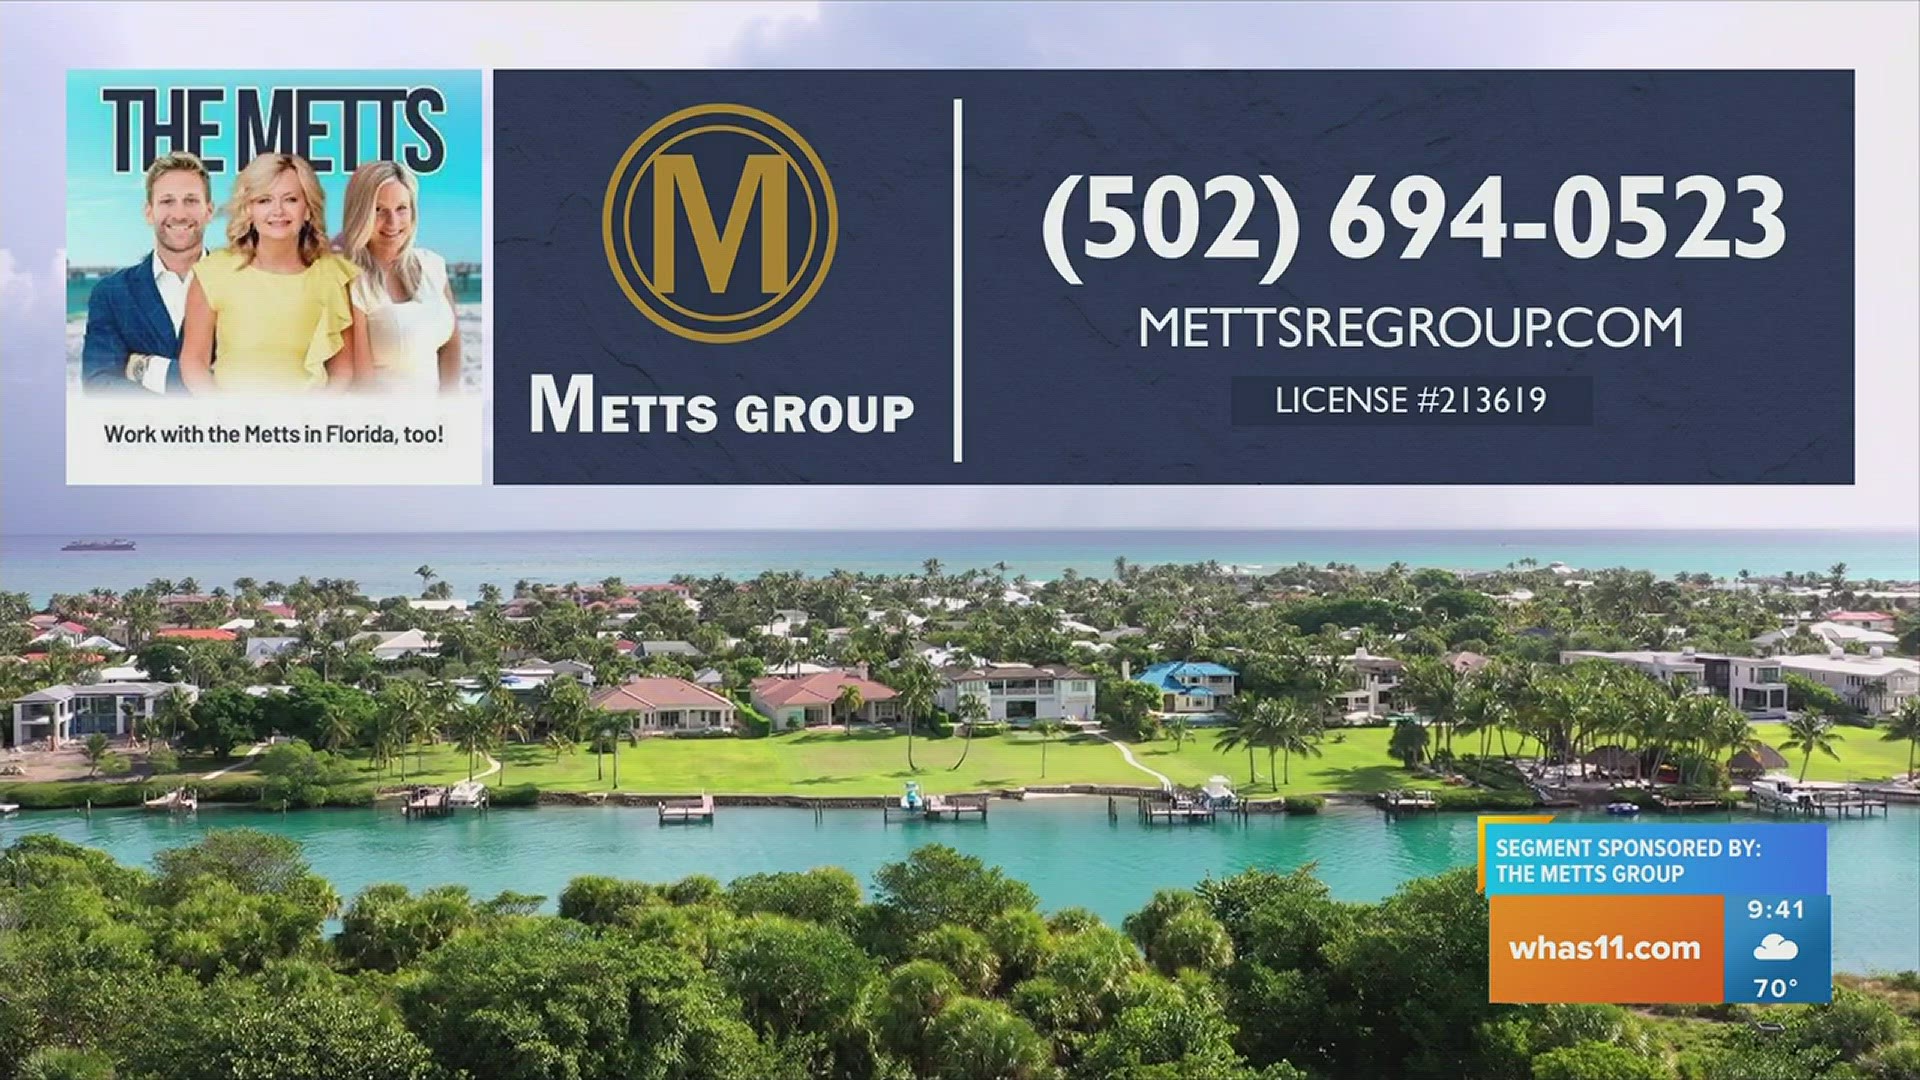 Learn more at mettsregroup.com